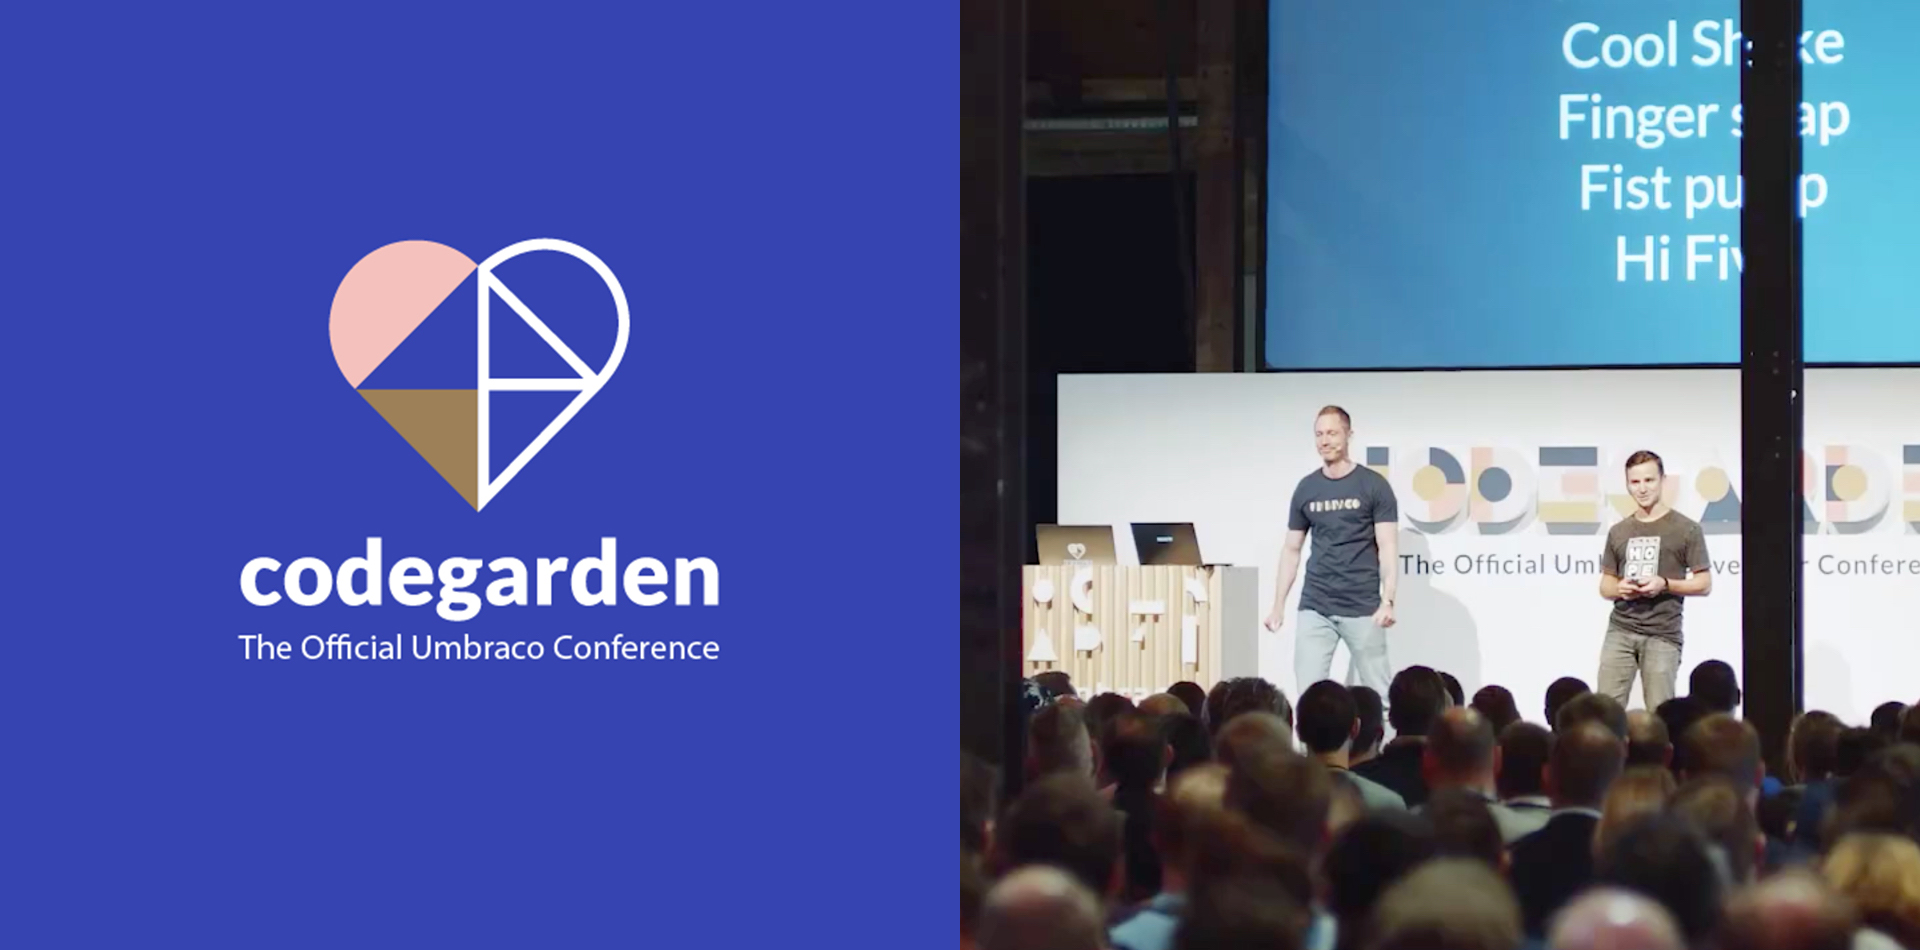 A photo of the Codegarden logo and speakers on stage at last years conference